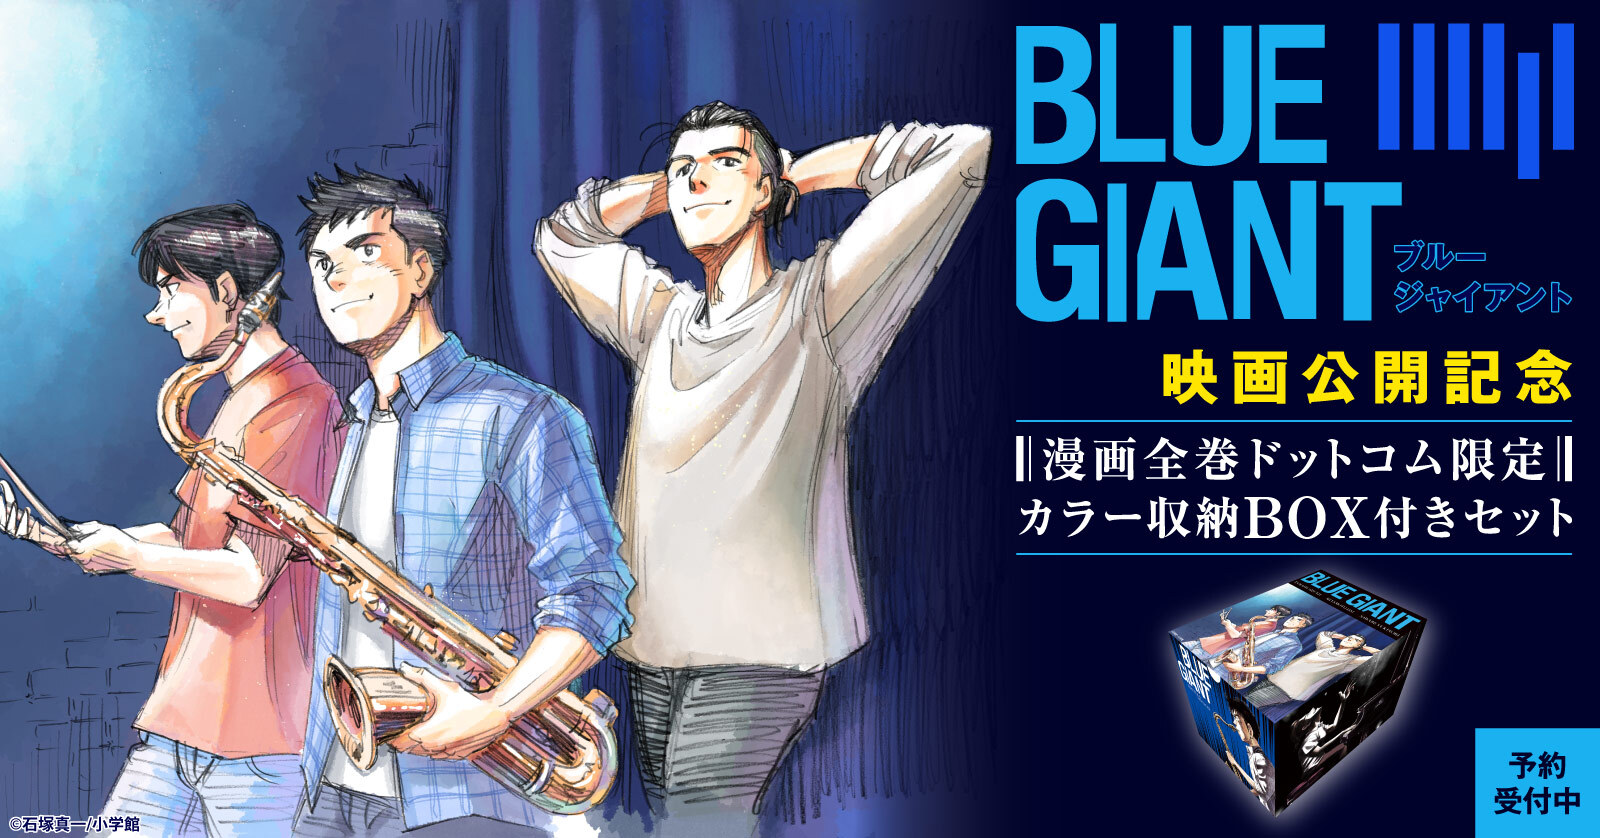 BLUE GIANT 10 冊セット 全巻 | 漫画全巻ドットコム